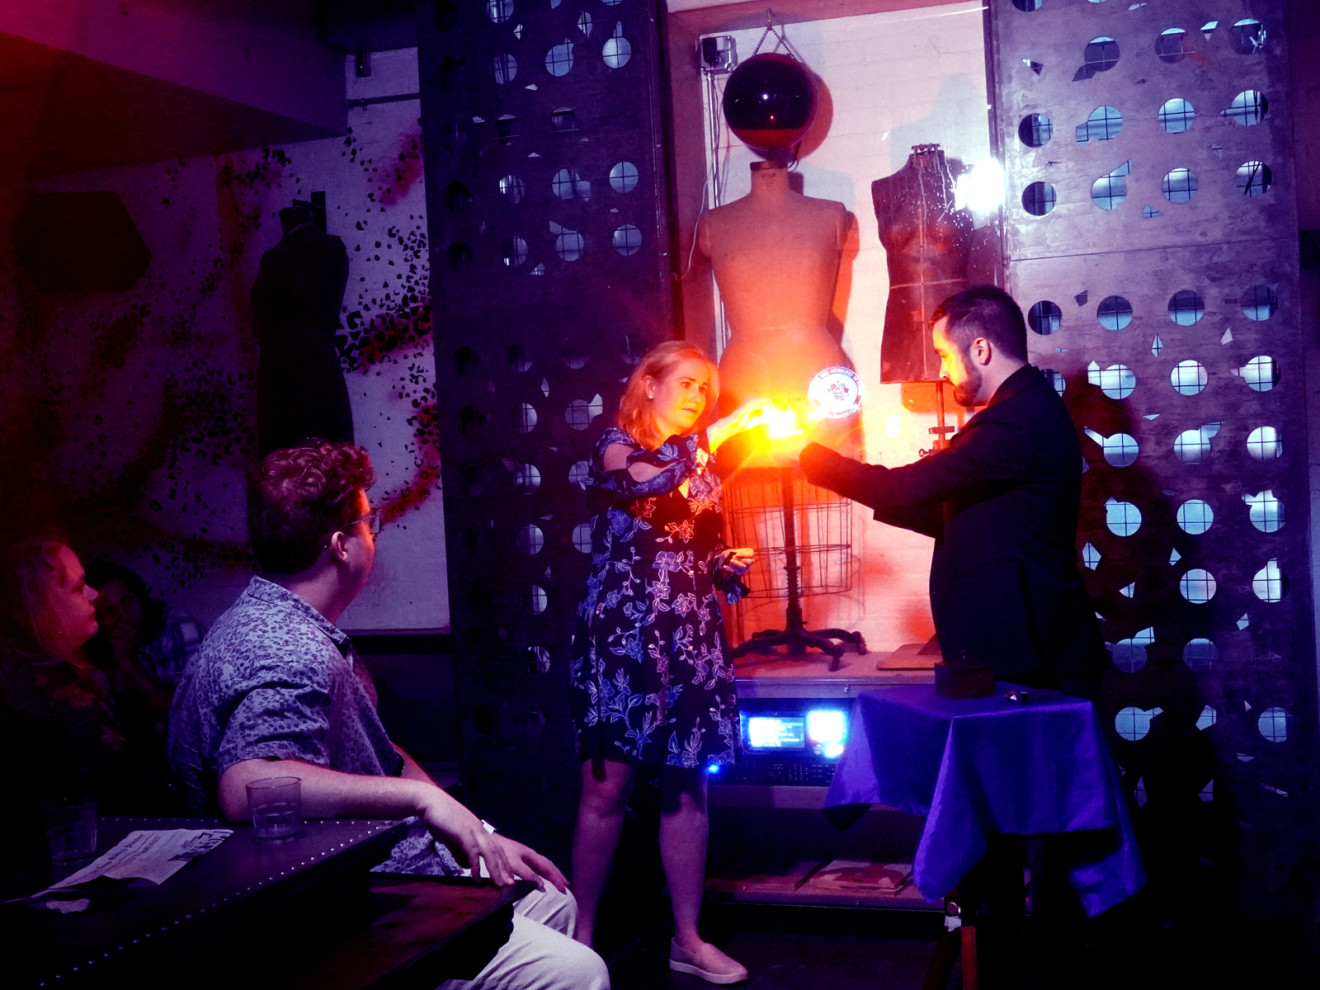 Society of Conjurers And Magicians NY: An Immersive Magic Show